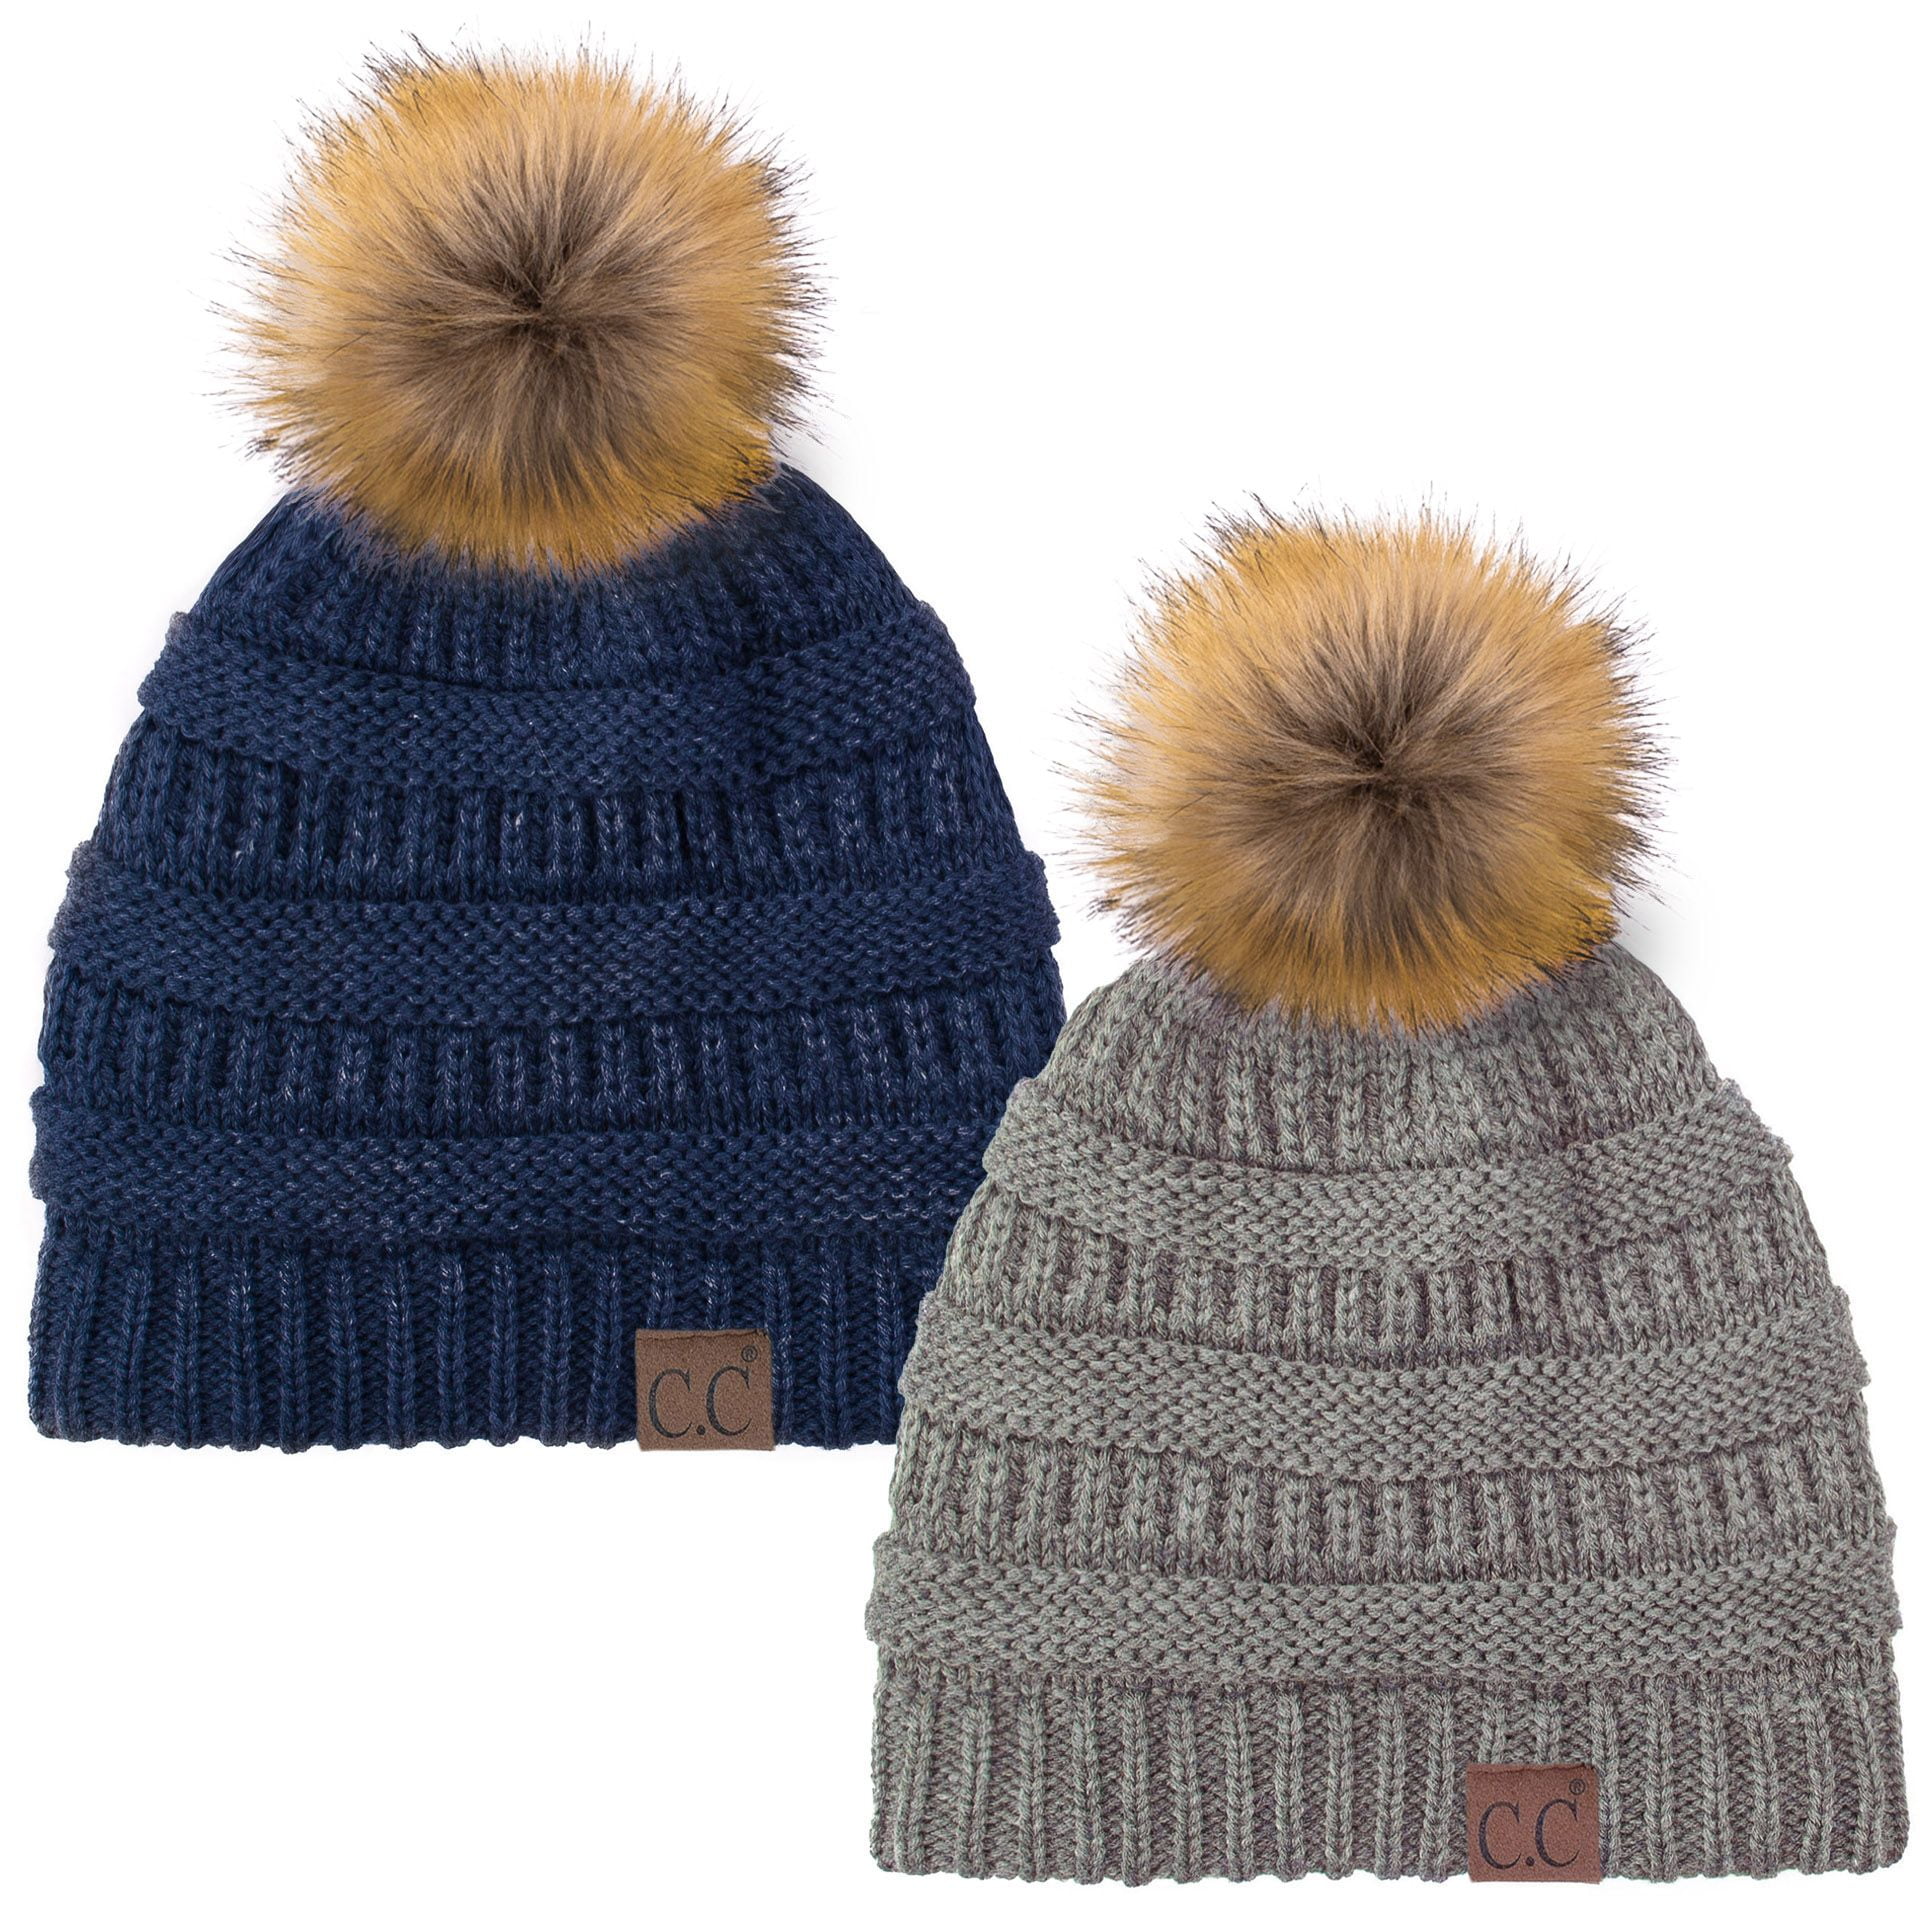 HAT-2213 HAT-2298 C.C Exclusives Geometric Cable Beanie Hat with Faux Fur Pom HAT-7011 YJ-920